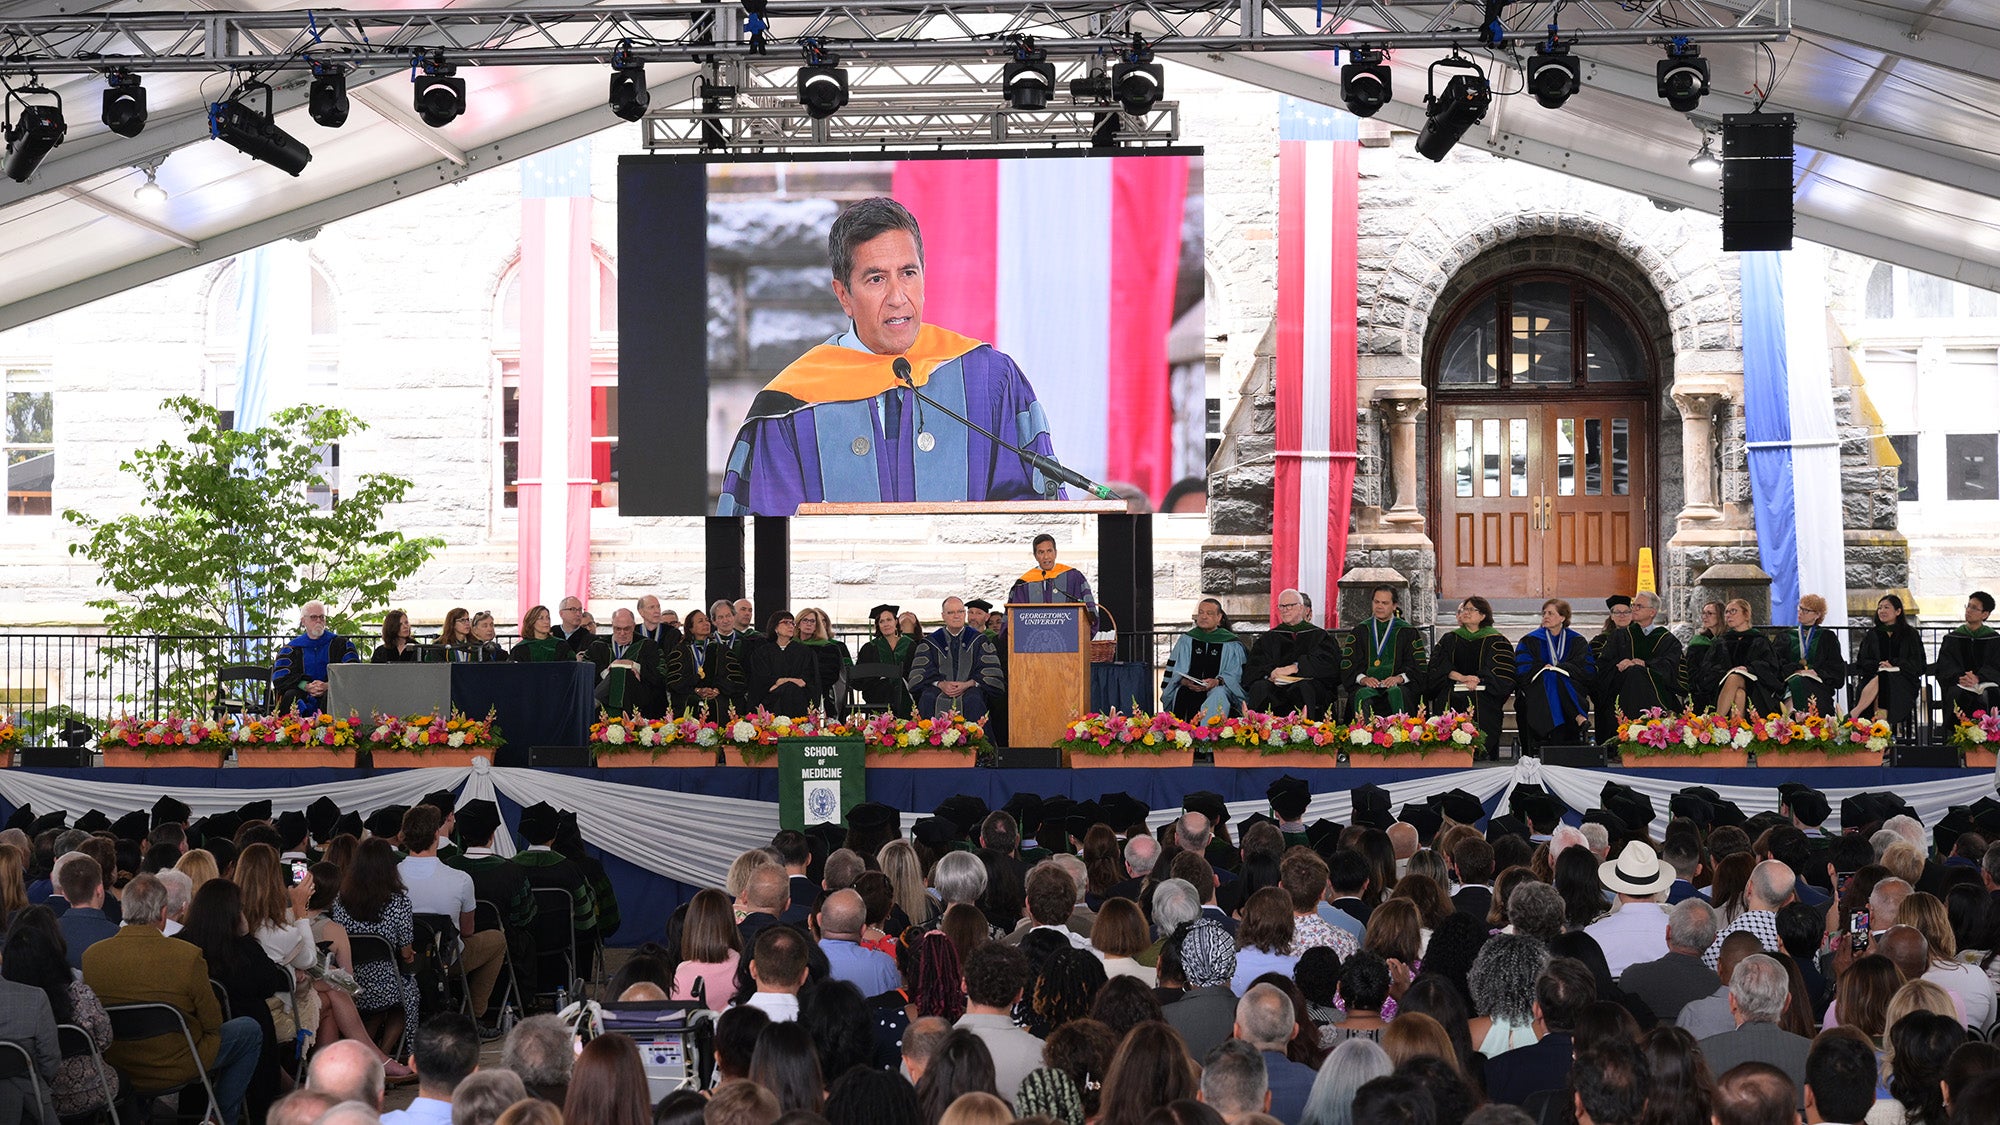 A long view of the stage at commencement with all the faculty seated in a row on either side of the podium where Sanjay Gupta speaks before a large audience